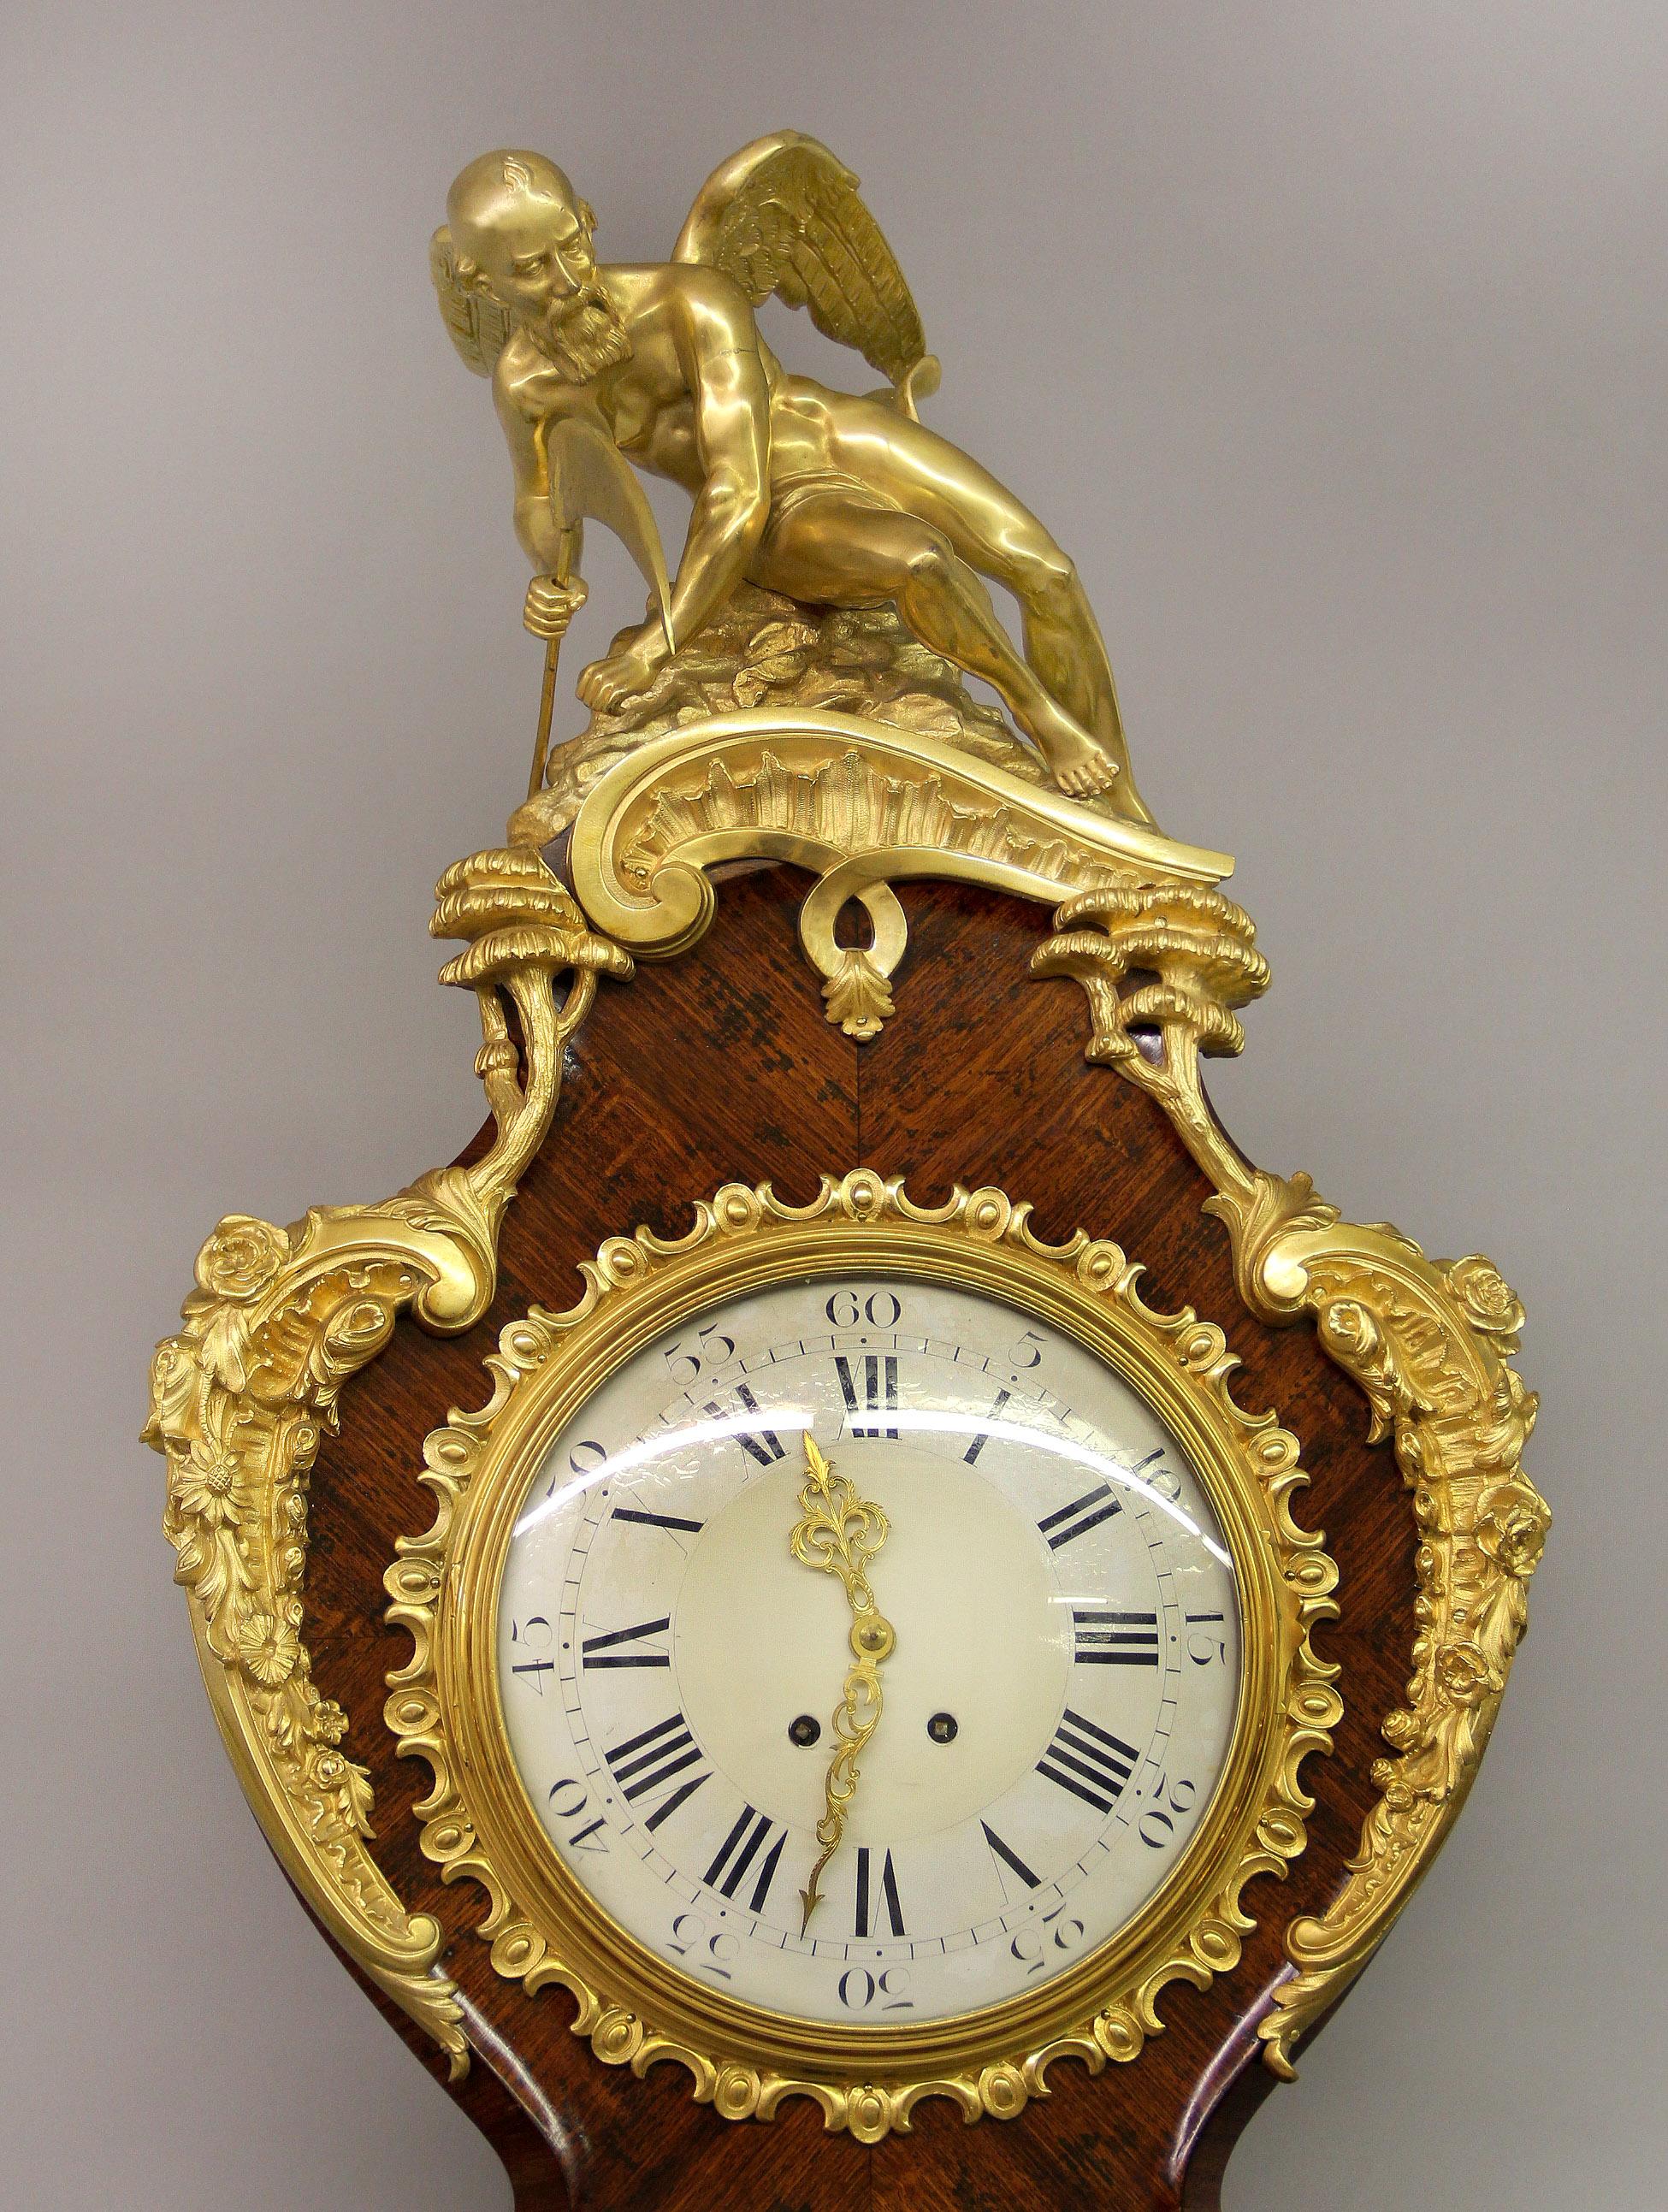 A superb late 19th century gilt bronze-mounted Regence style parquetry Regulateur De Parquet

By François Linke

The serpentine-shaped case surmounted by a figure of Chronos, the head centered with a black and white enamel dial and surrounded